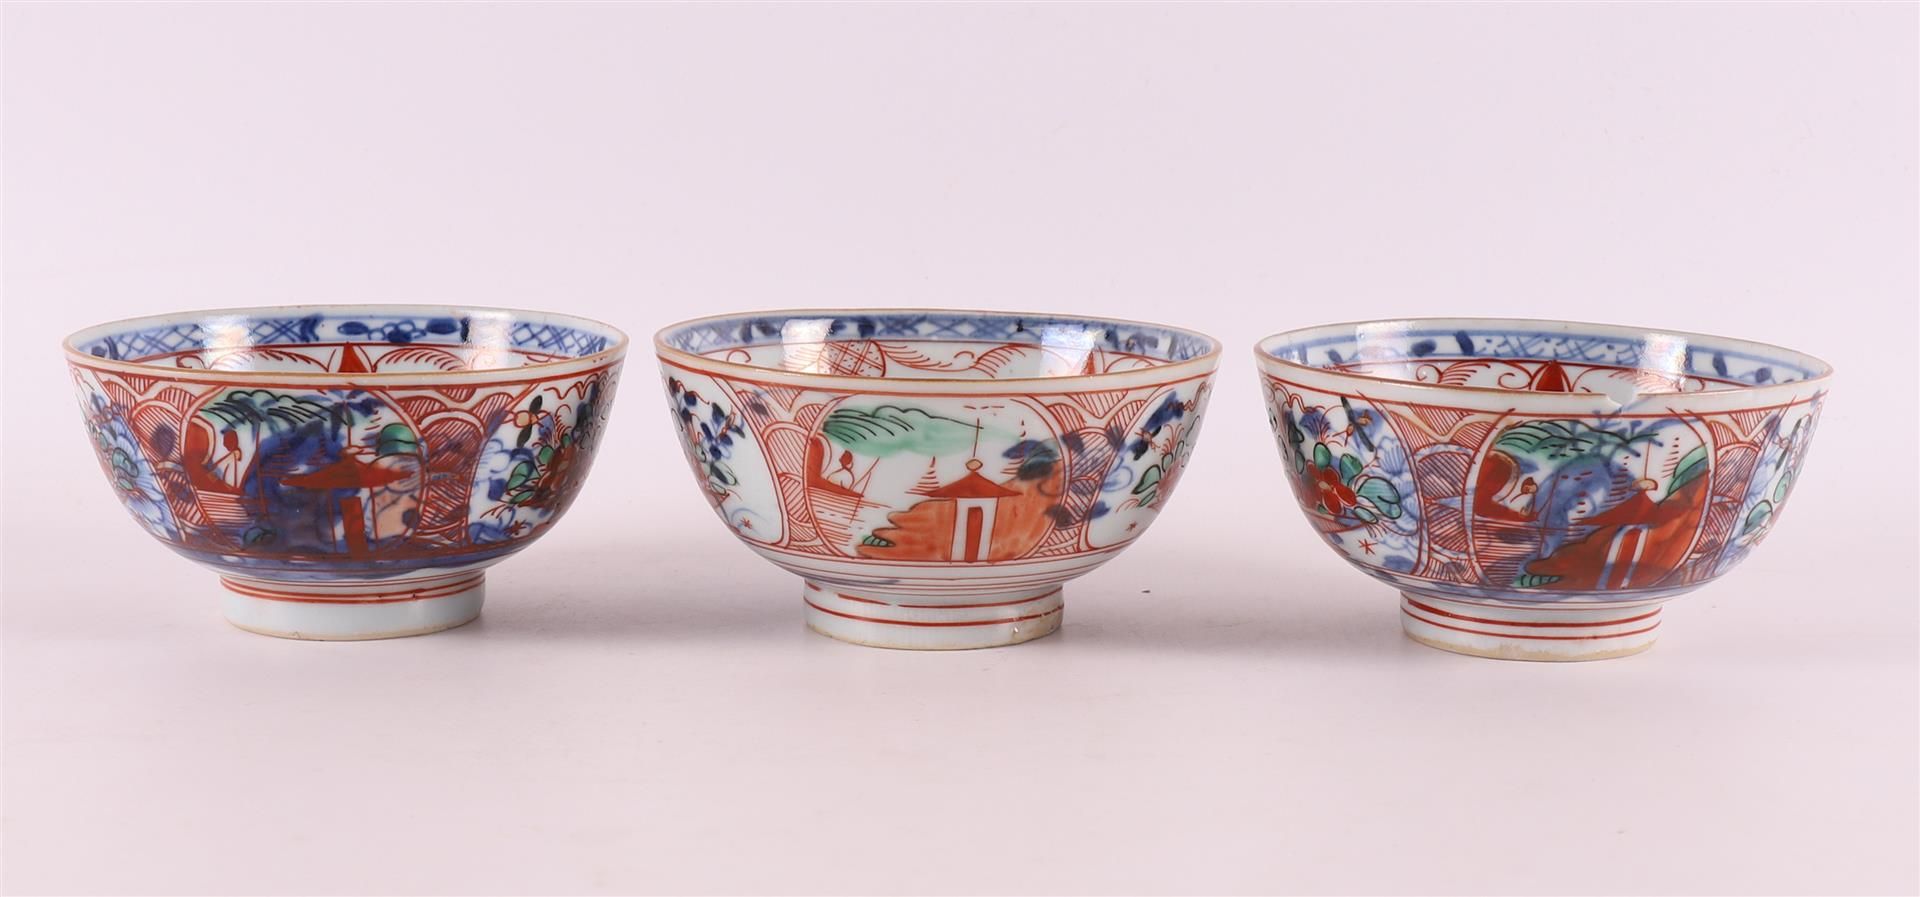 Five various porcelain Amsterdam variegated bowls, China, 18th century. - Image 14 of 17